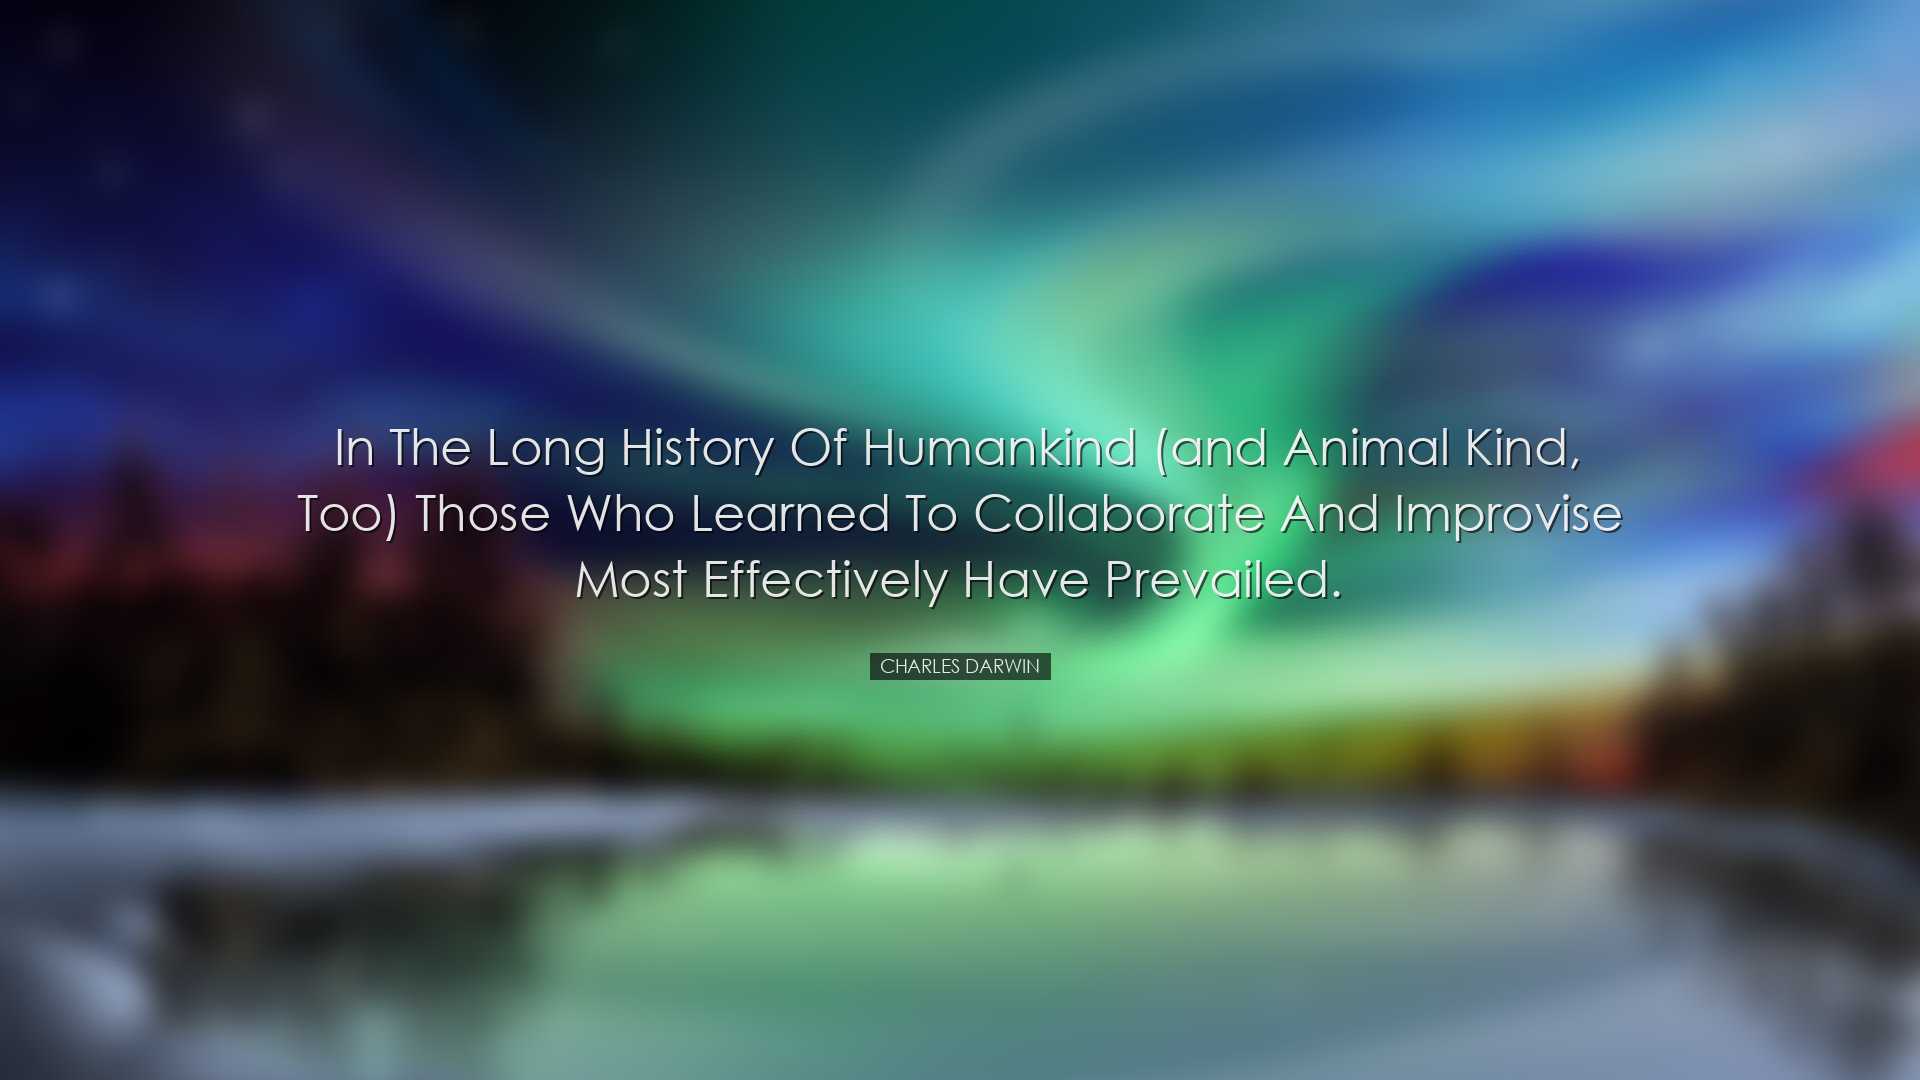 In the long history of humankind (and animal kind, too) those who